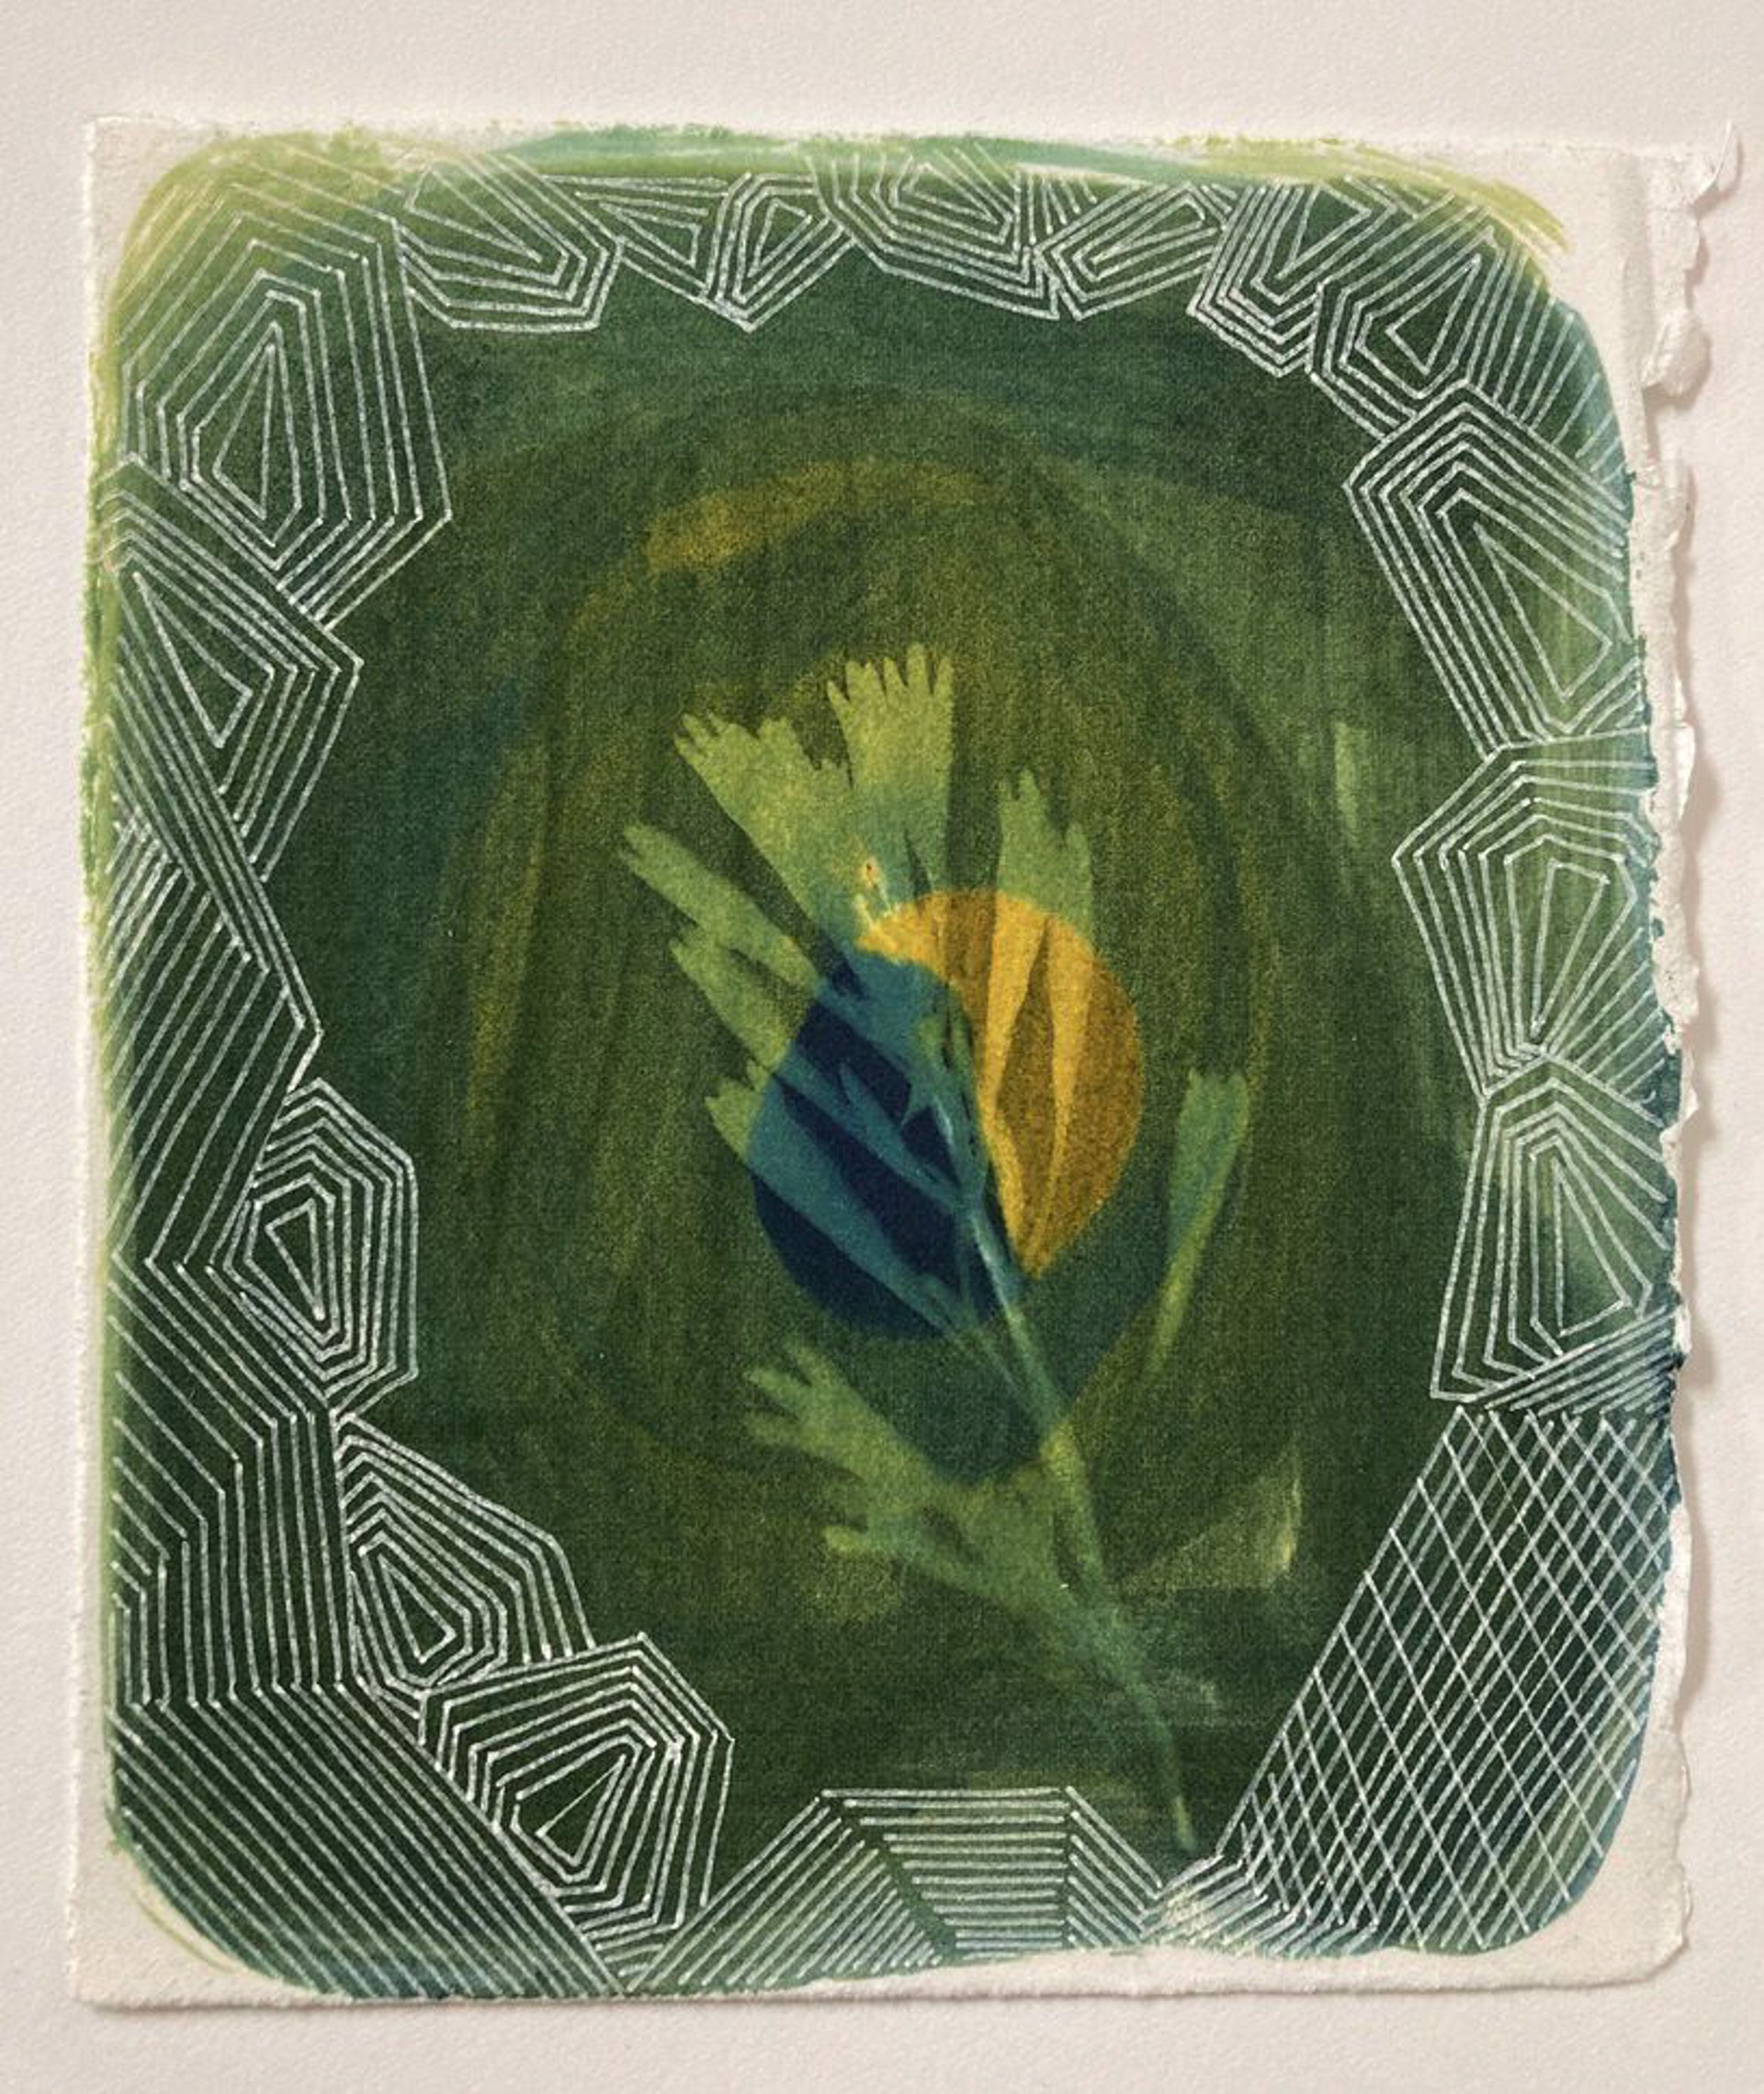 Summer Series #6 (Sage green with blue/yellow) by Kirsten Furlong